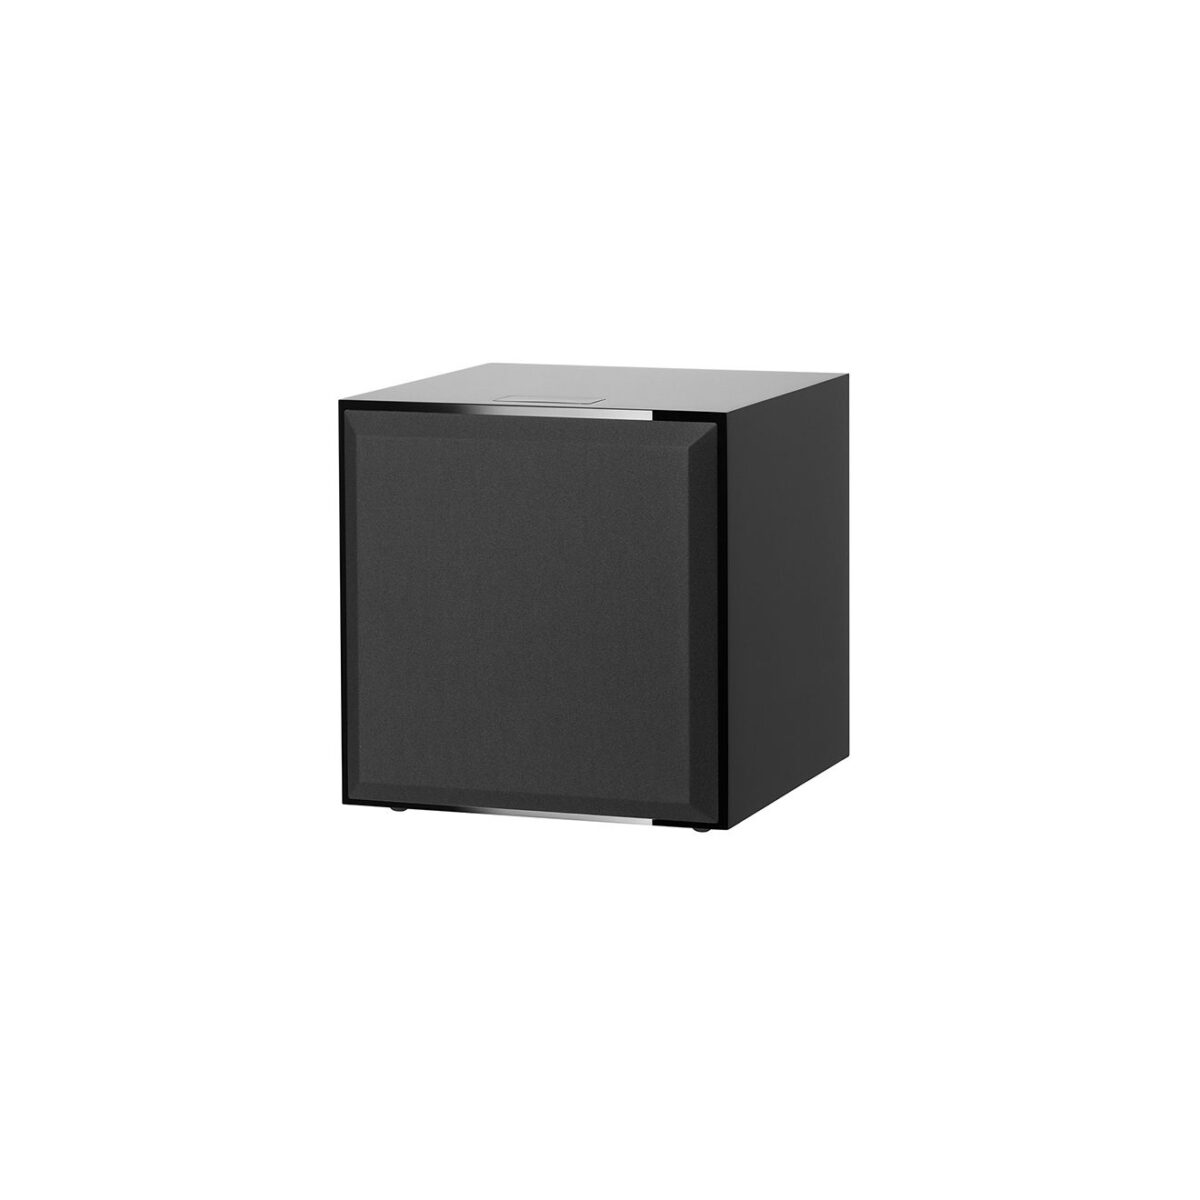 Bowers & Wilkins Subwoofer DB4